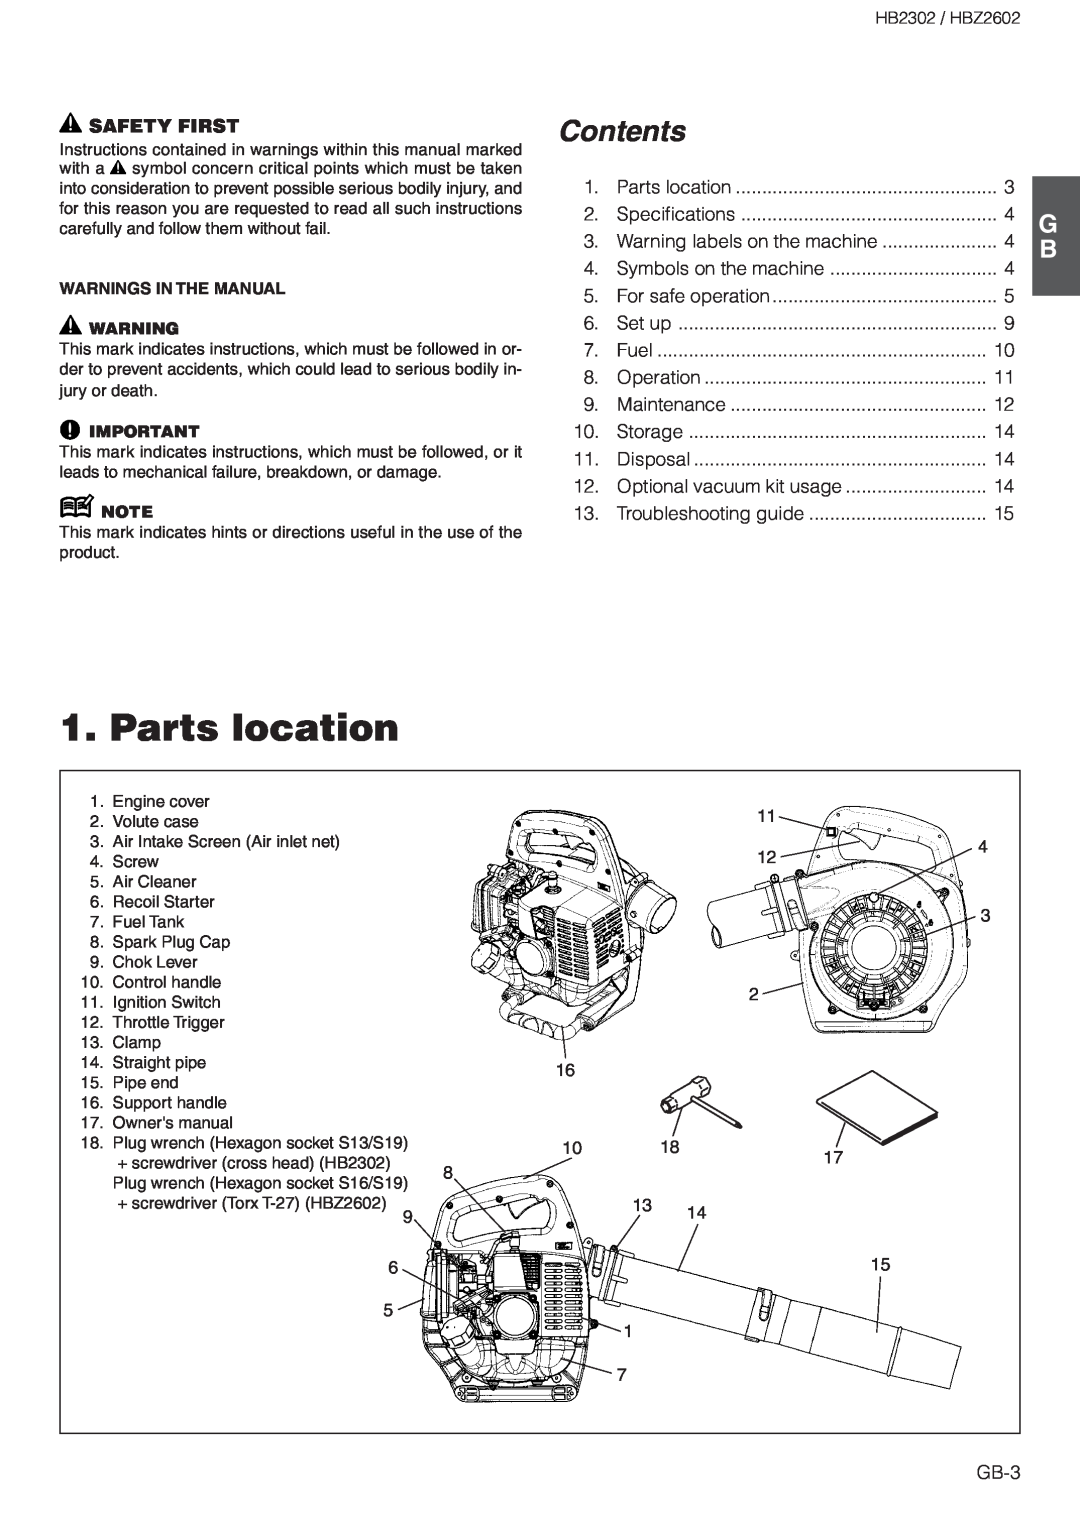 Zenoah HBZ2602 owner manual Parts location, Safety First, Contents 